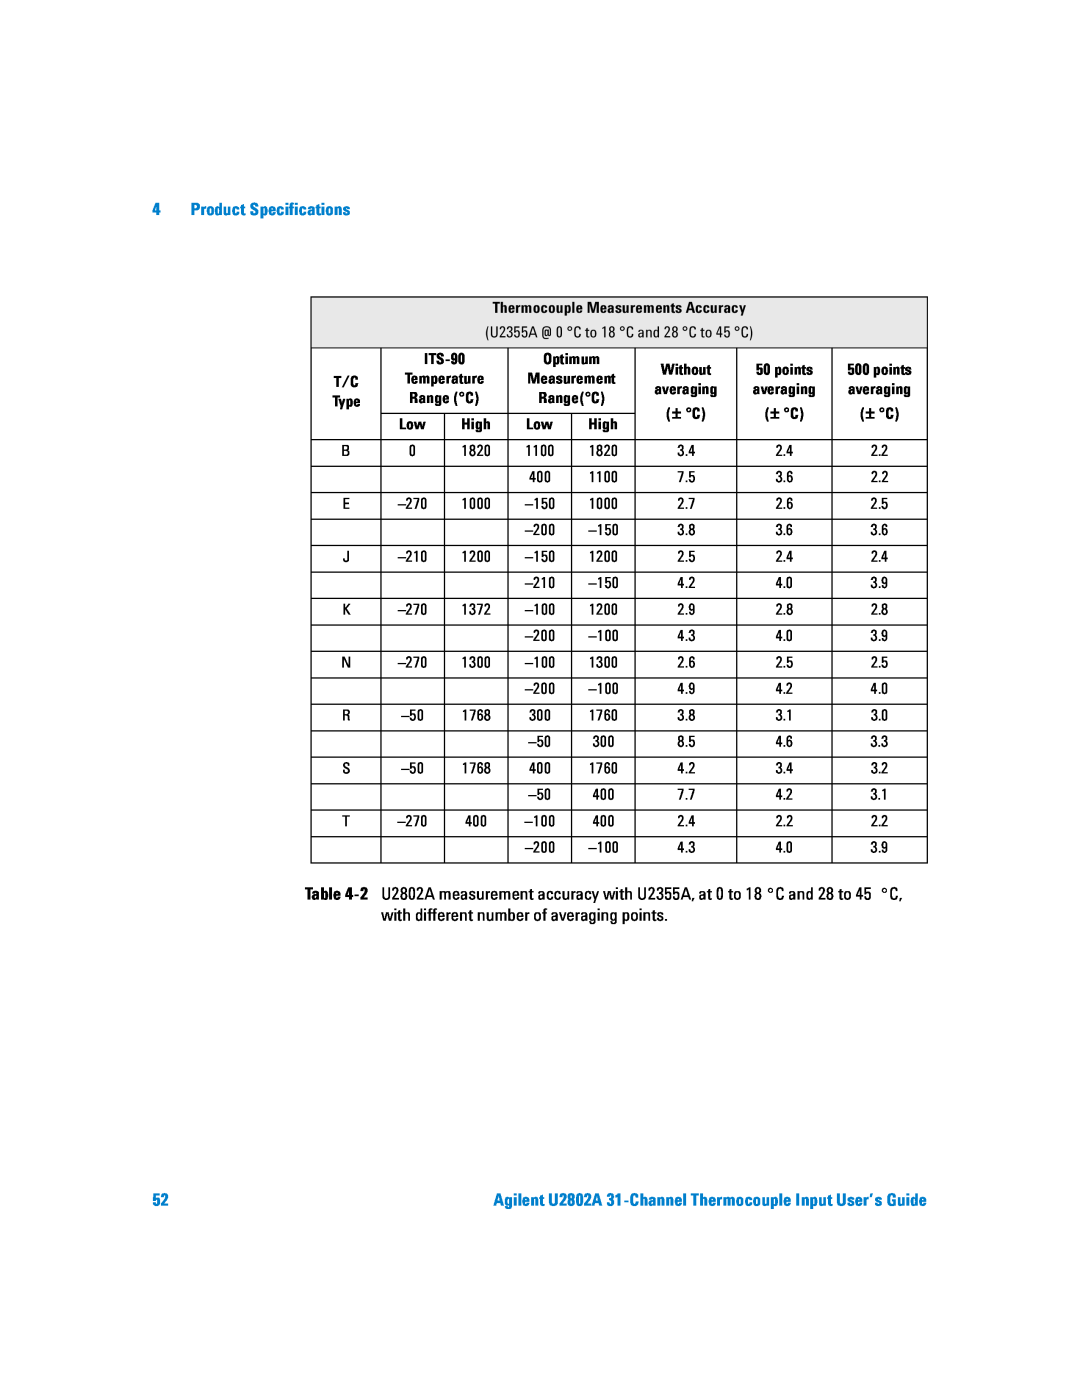 Agilent Technologies U2802A Product Specifications, Table, with different number of averaging points, High, ITS-90, RangeC 